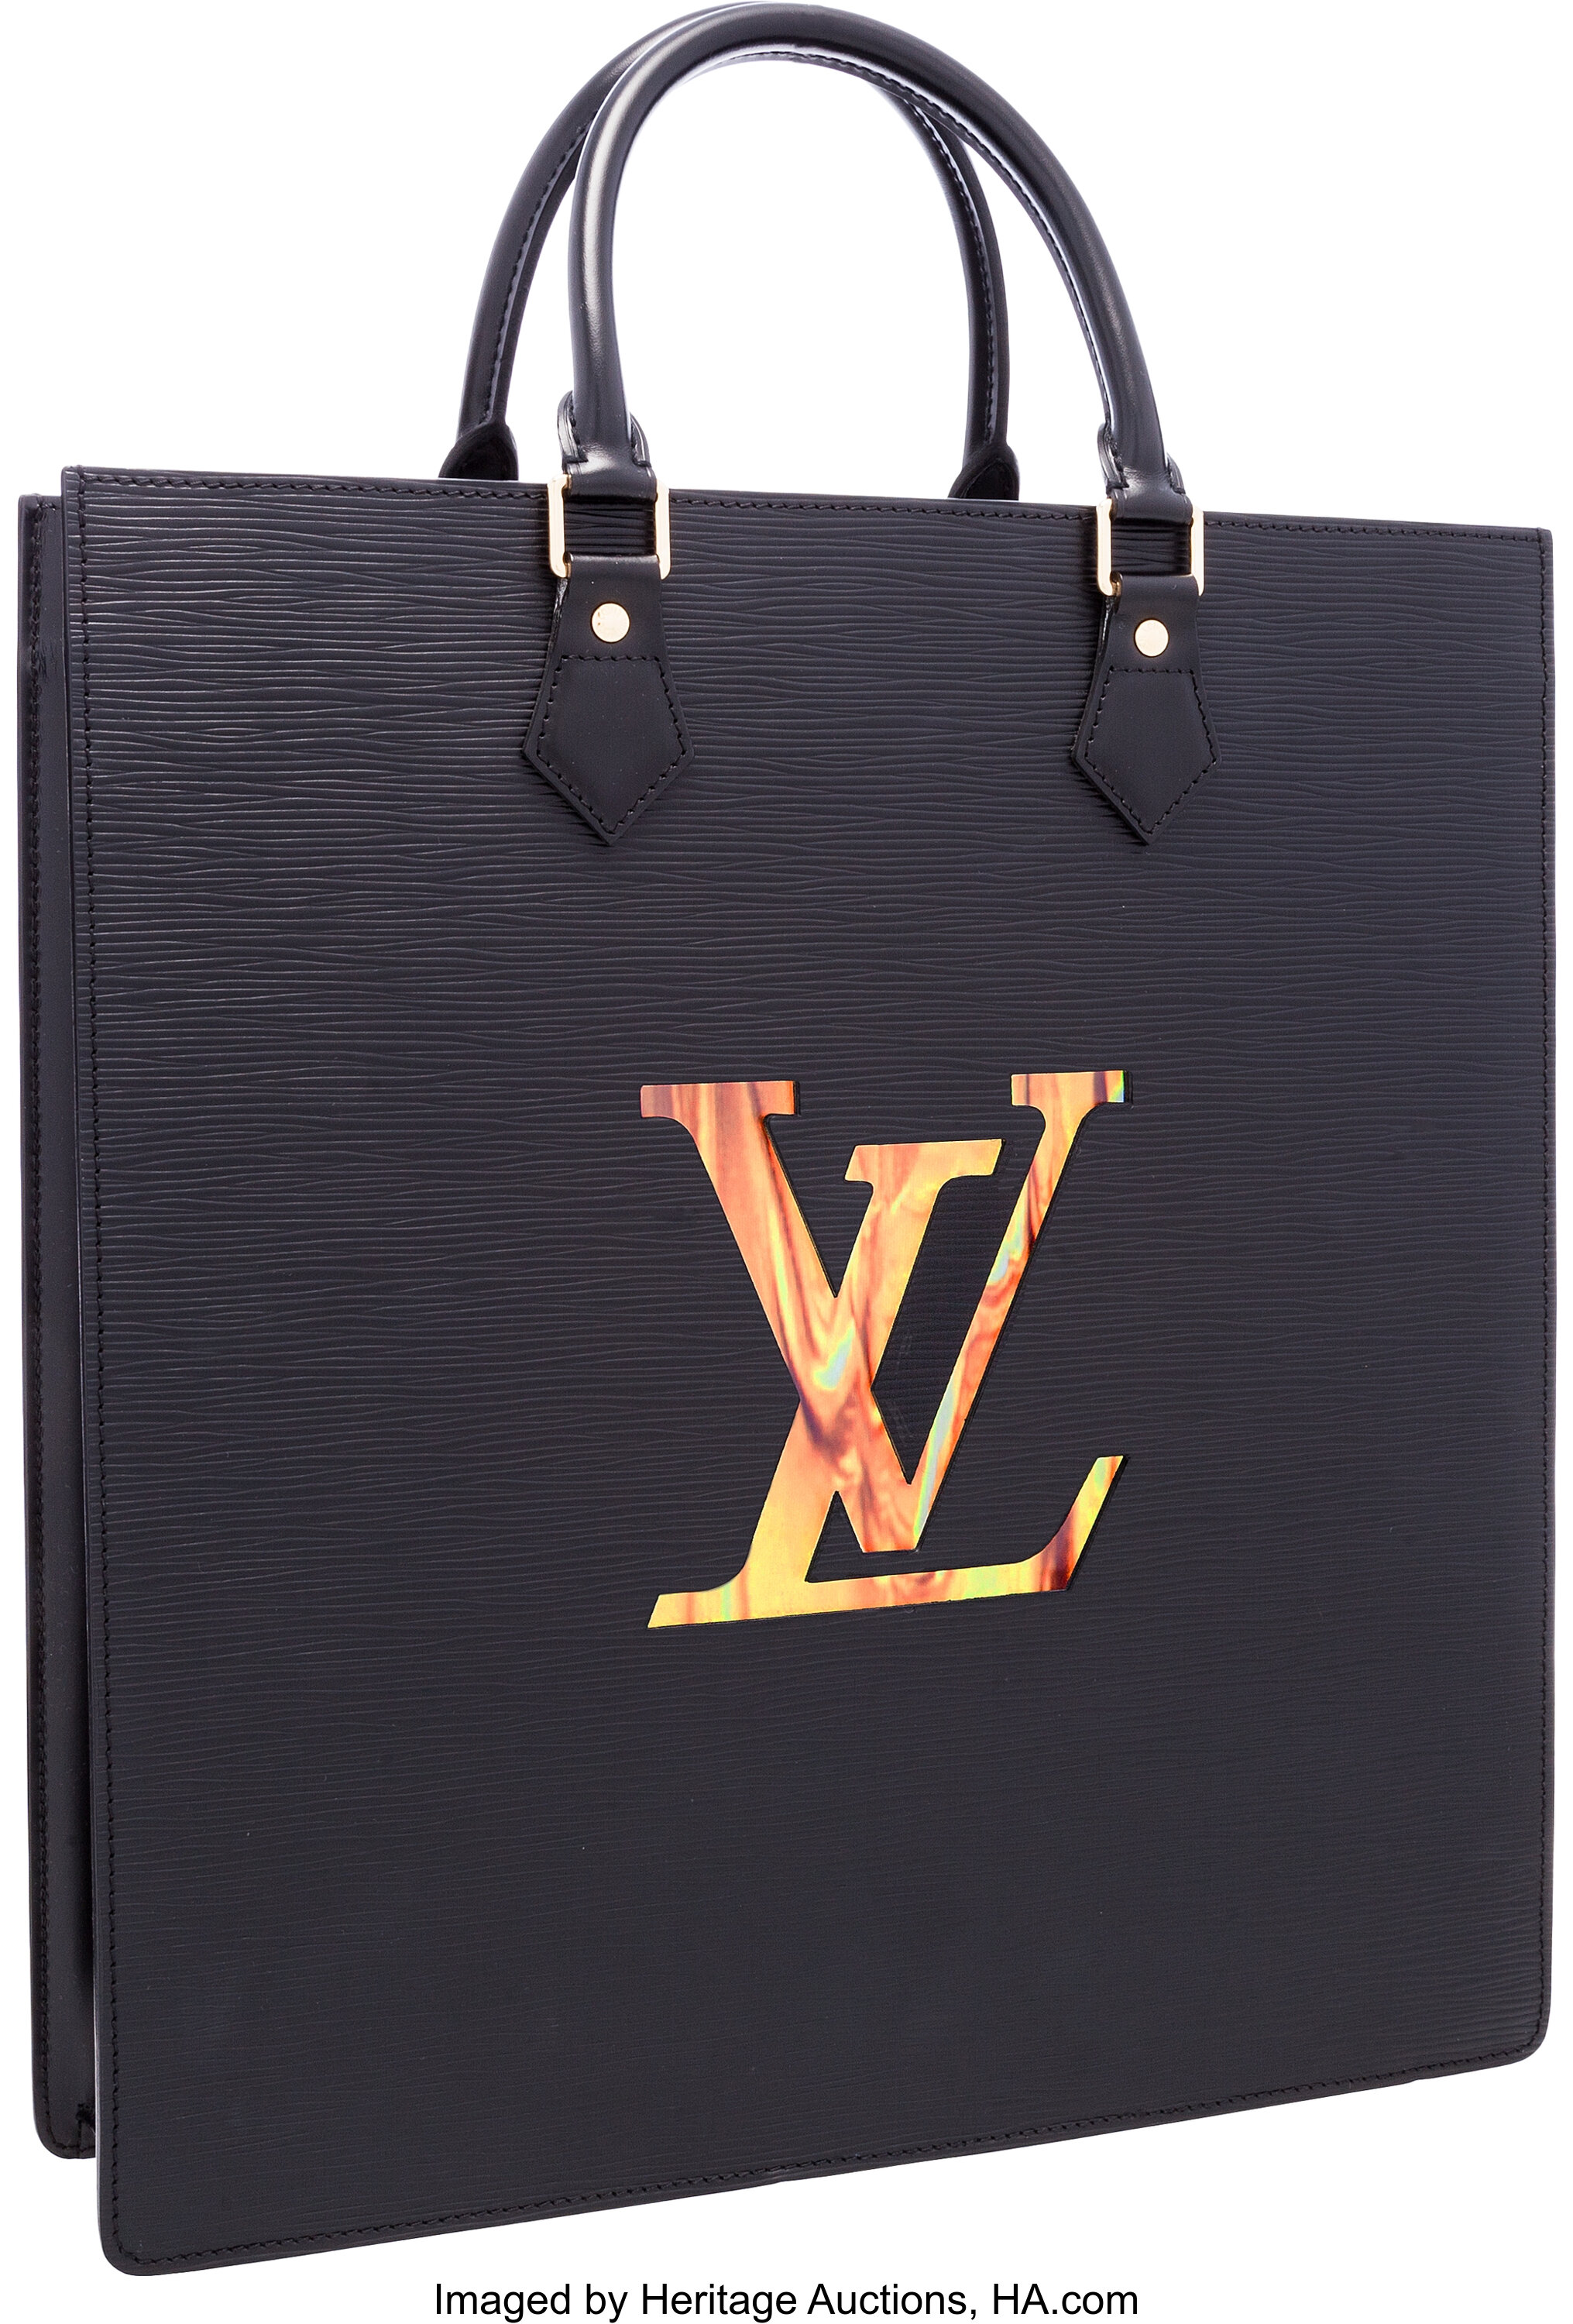 The new Monogram Fusion collection of Louis Vuitton